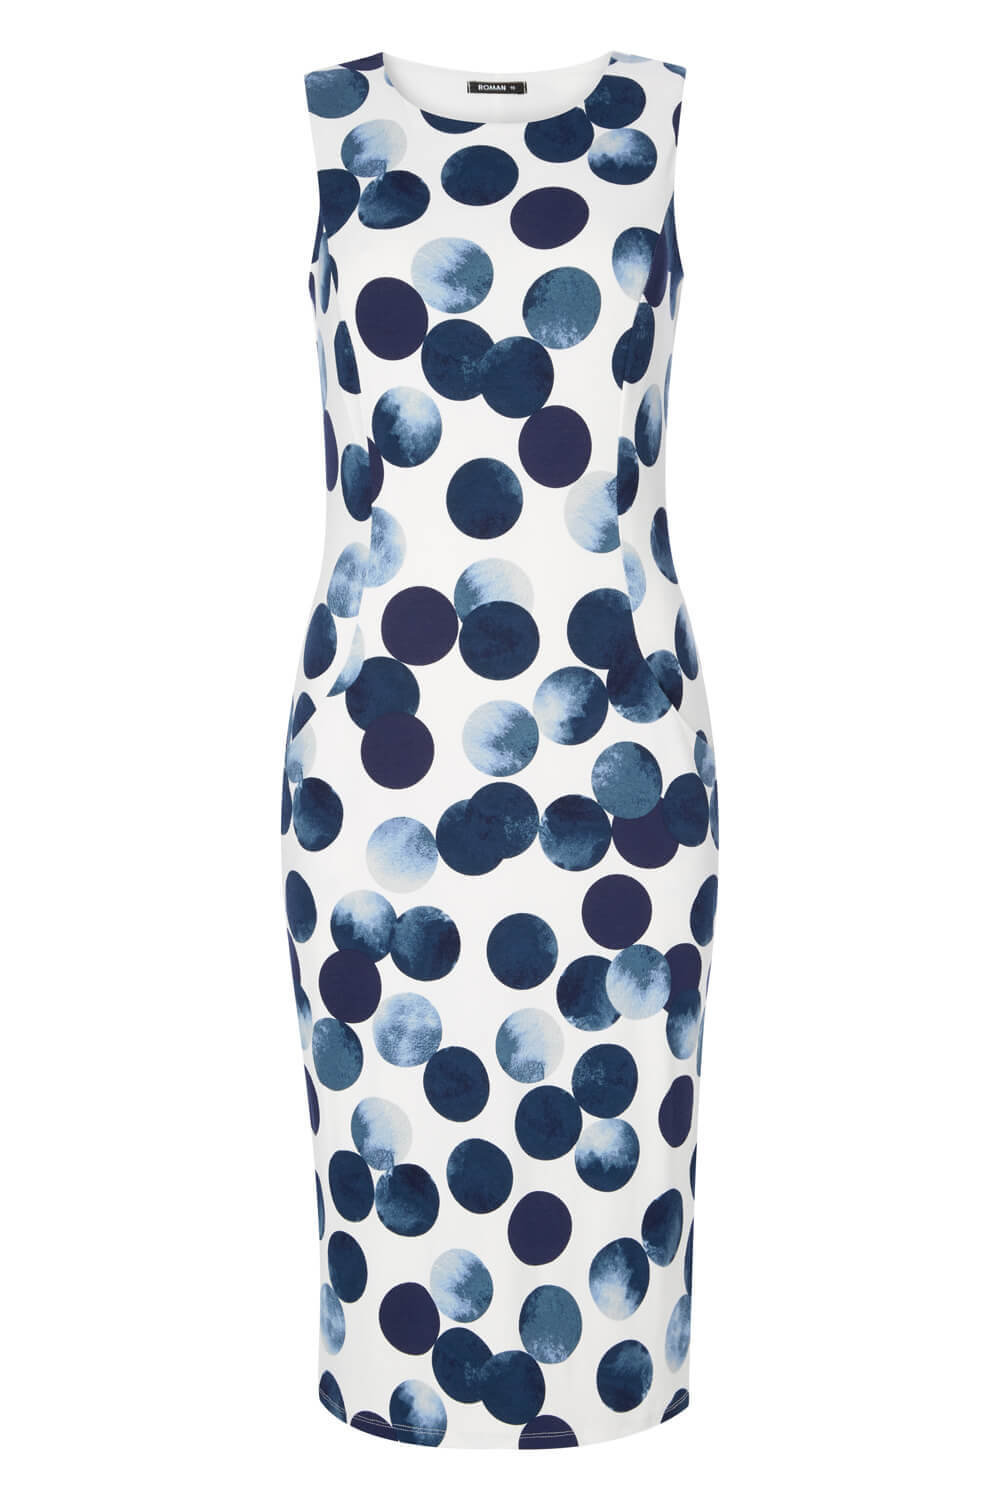 Ivory  Spot Print Dress With Pockets, Image 6 of 6